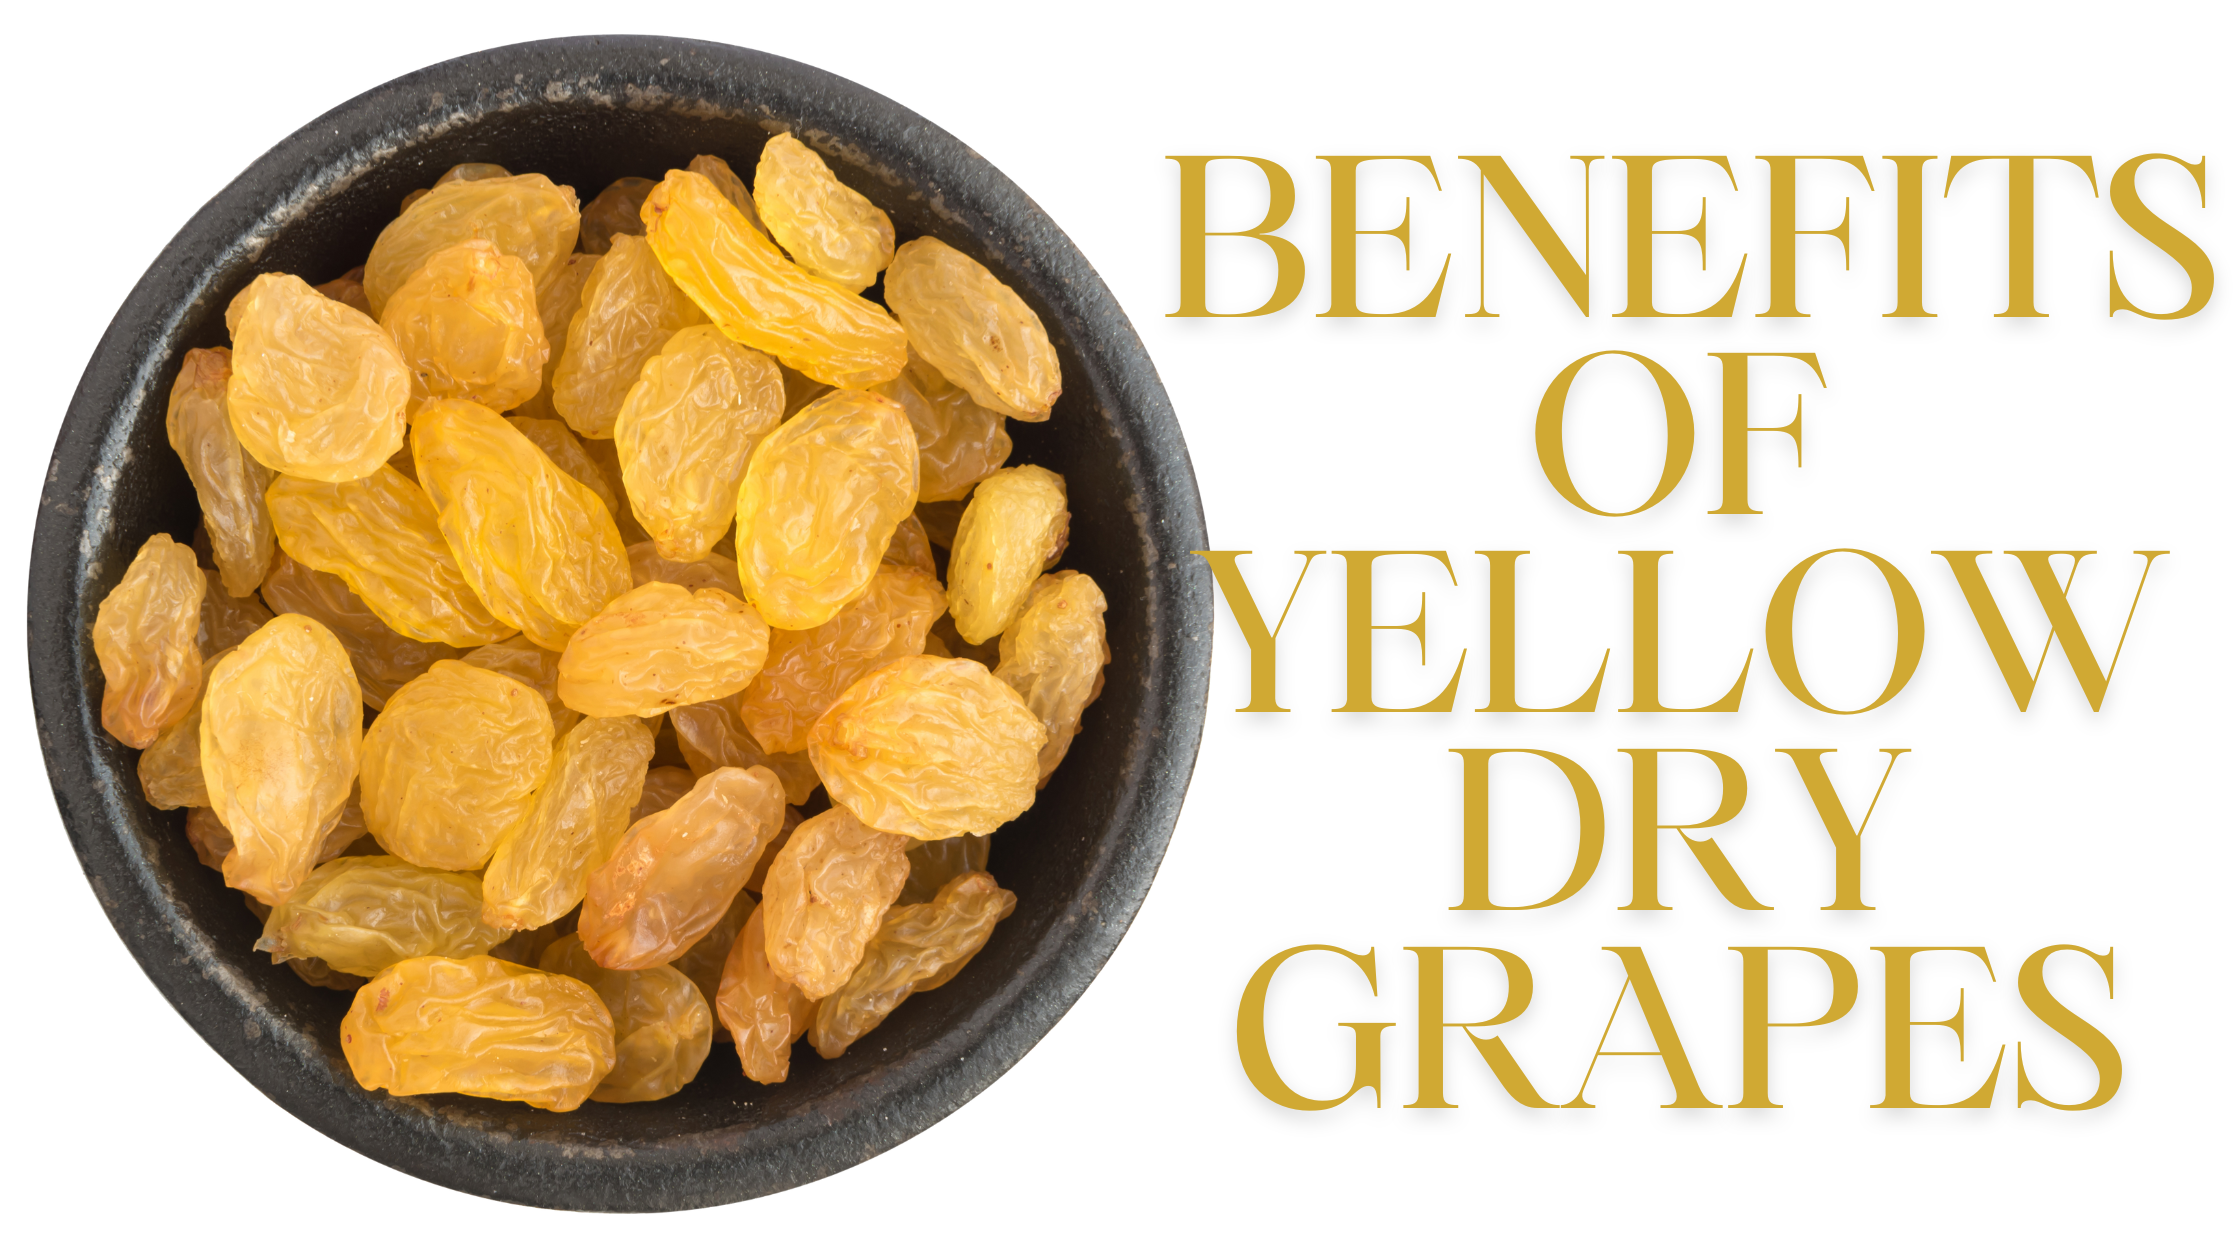 The Nutritional health benefits of Yellow Dry Grapes